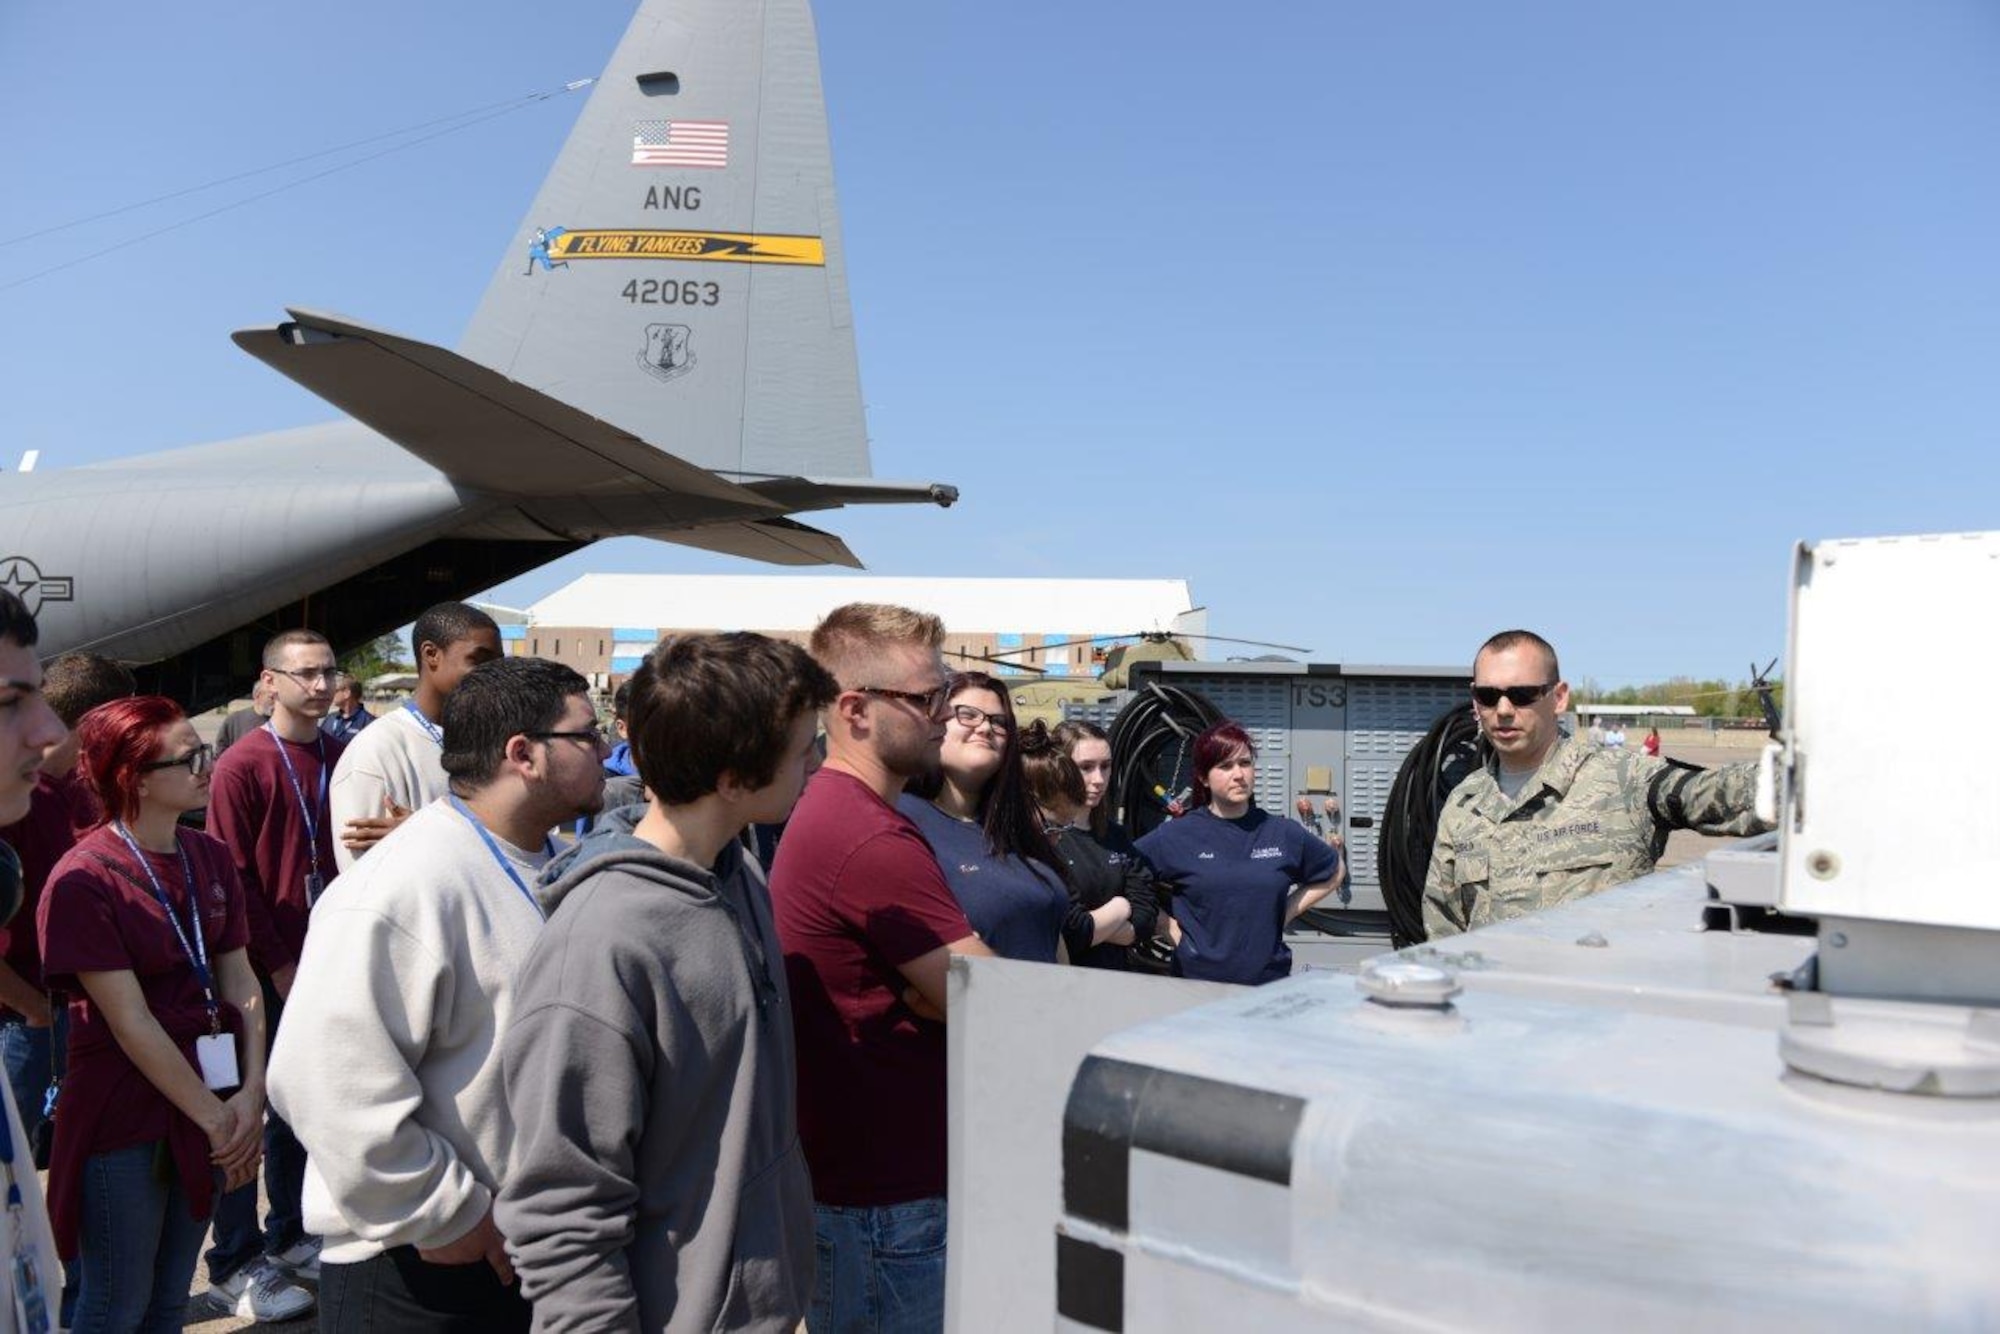 Master Sgt. Dennis Coughlin, aircraft ground equipment technician, explains the function and purpose of equipment to support flight mobility May 12, 2016, during a Career Day hosted at Bradley Air National Guard Base, East Granby, Conn. Students discussed military careers with Air National Guardsmen during their visit to the 103rd Airlift Wing. (U.S. Air Force photo by Master Sgt. Erin McNamara)